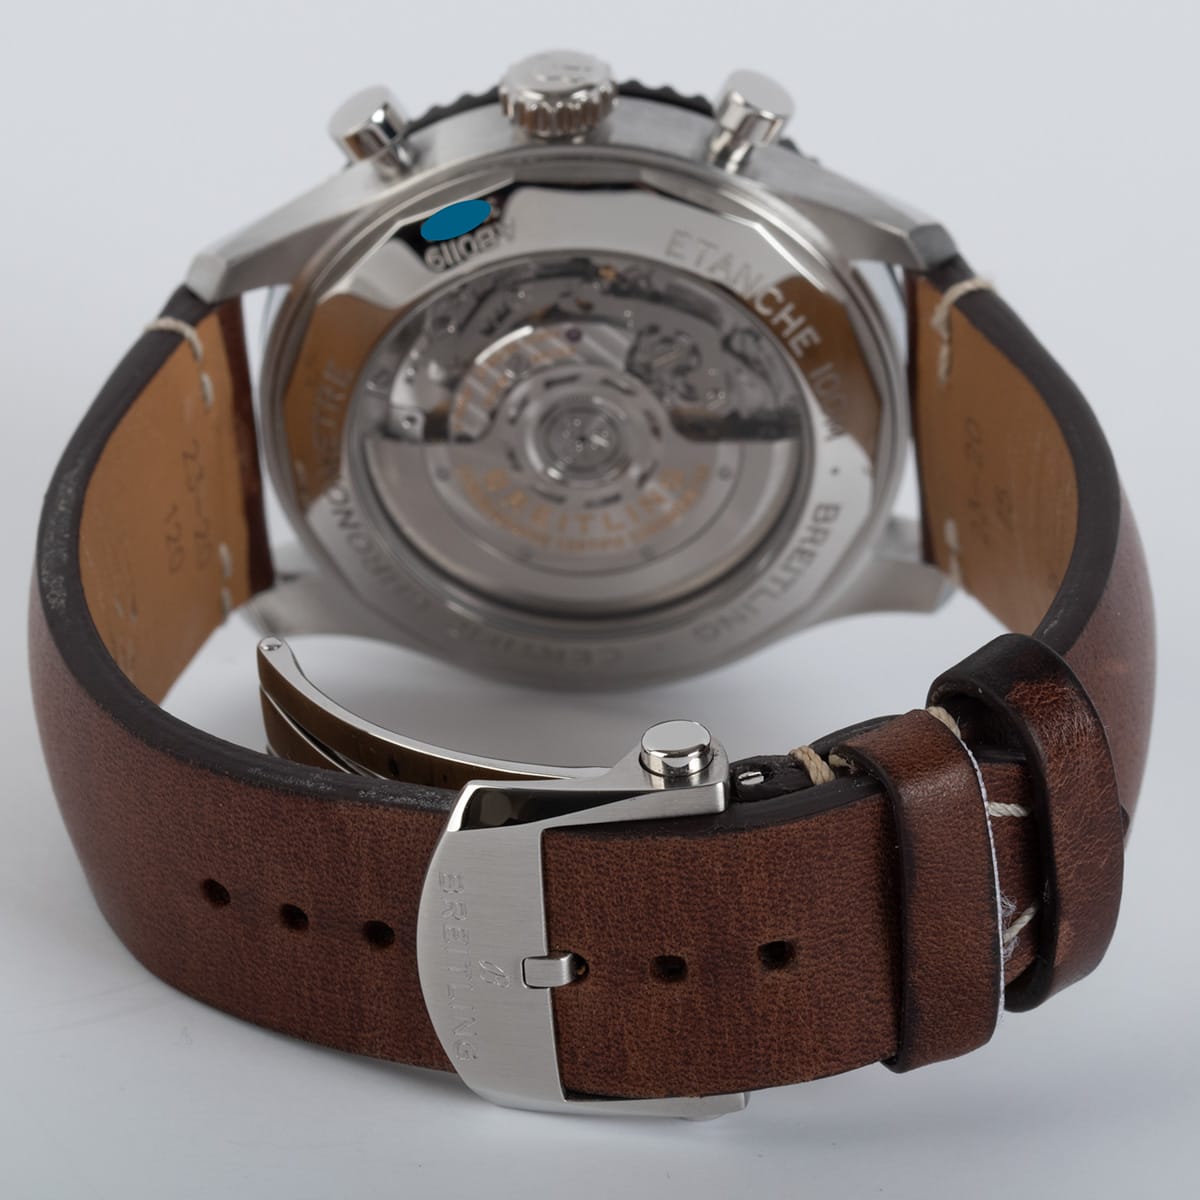 Rear / Band View of Aviator 8 Chronograph 'Mosquito'